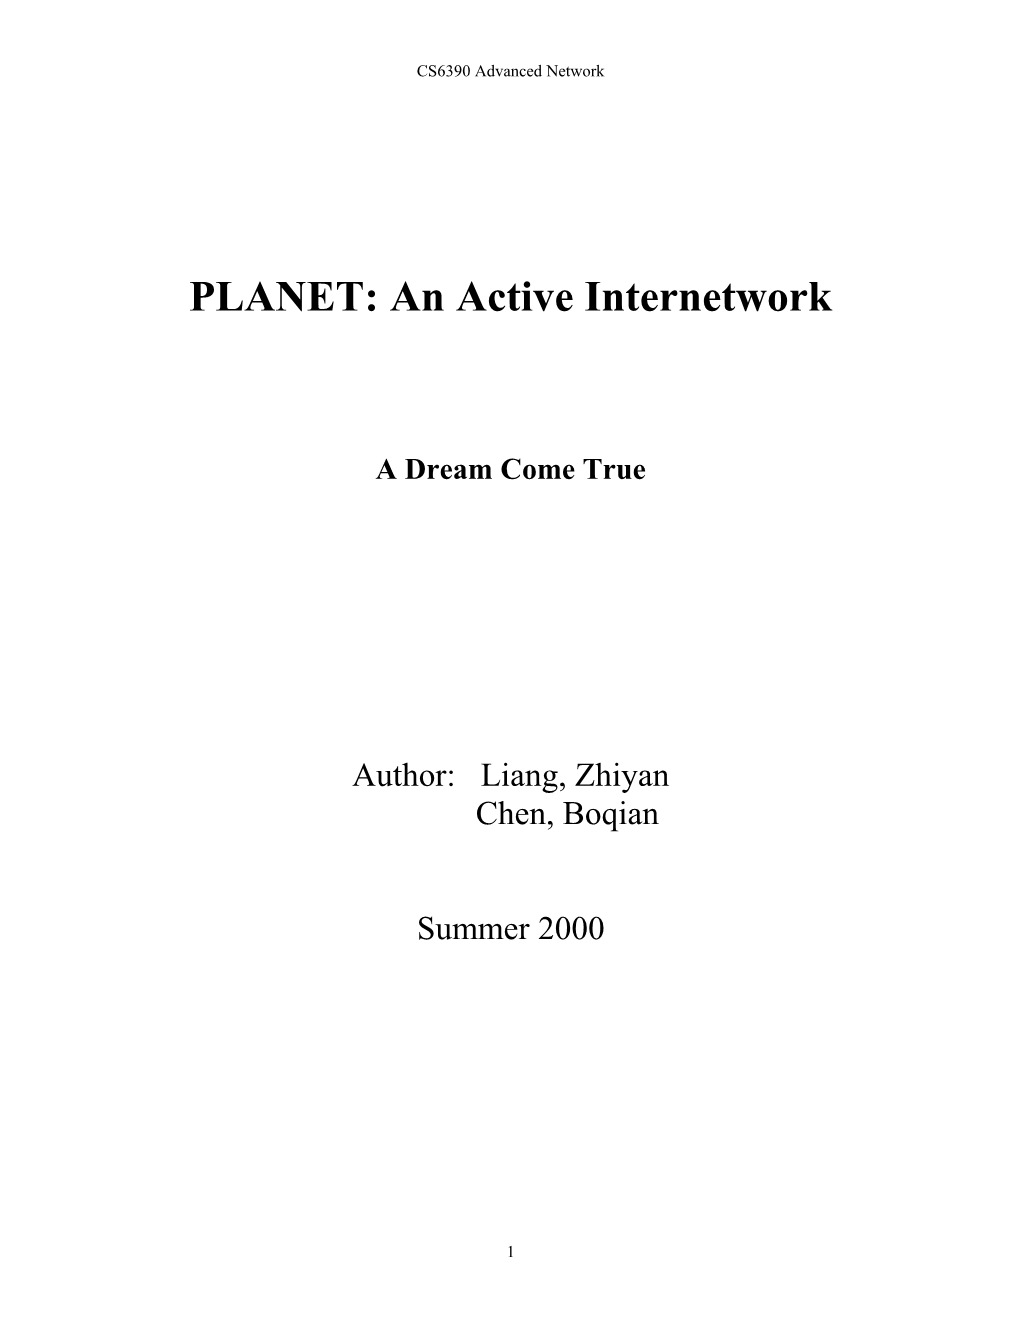 PLANET: an Active Internetwork